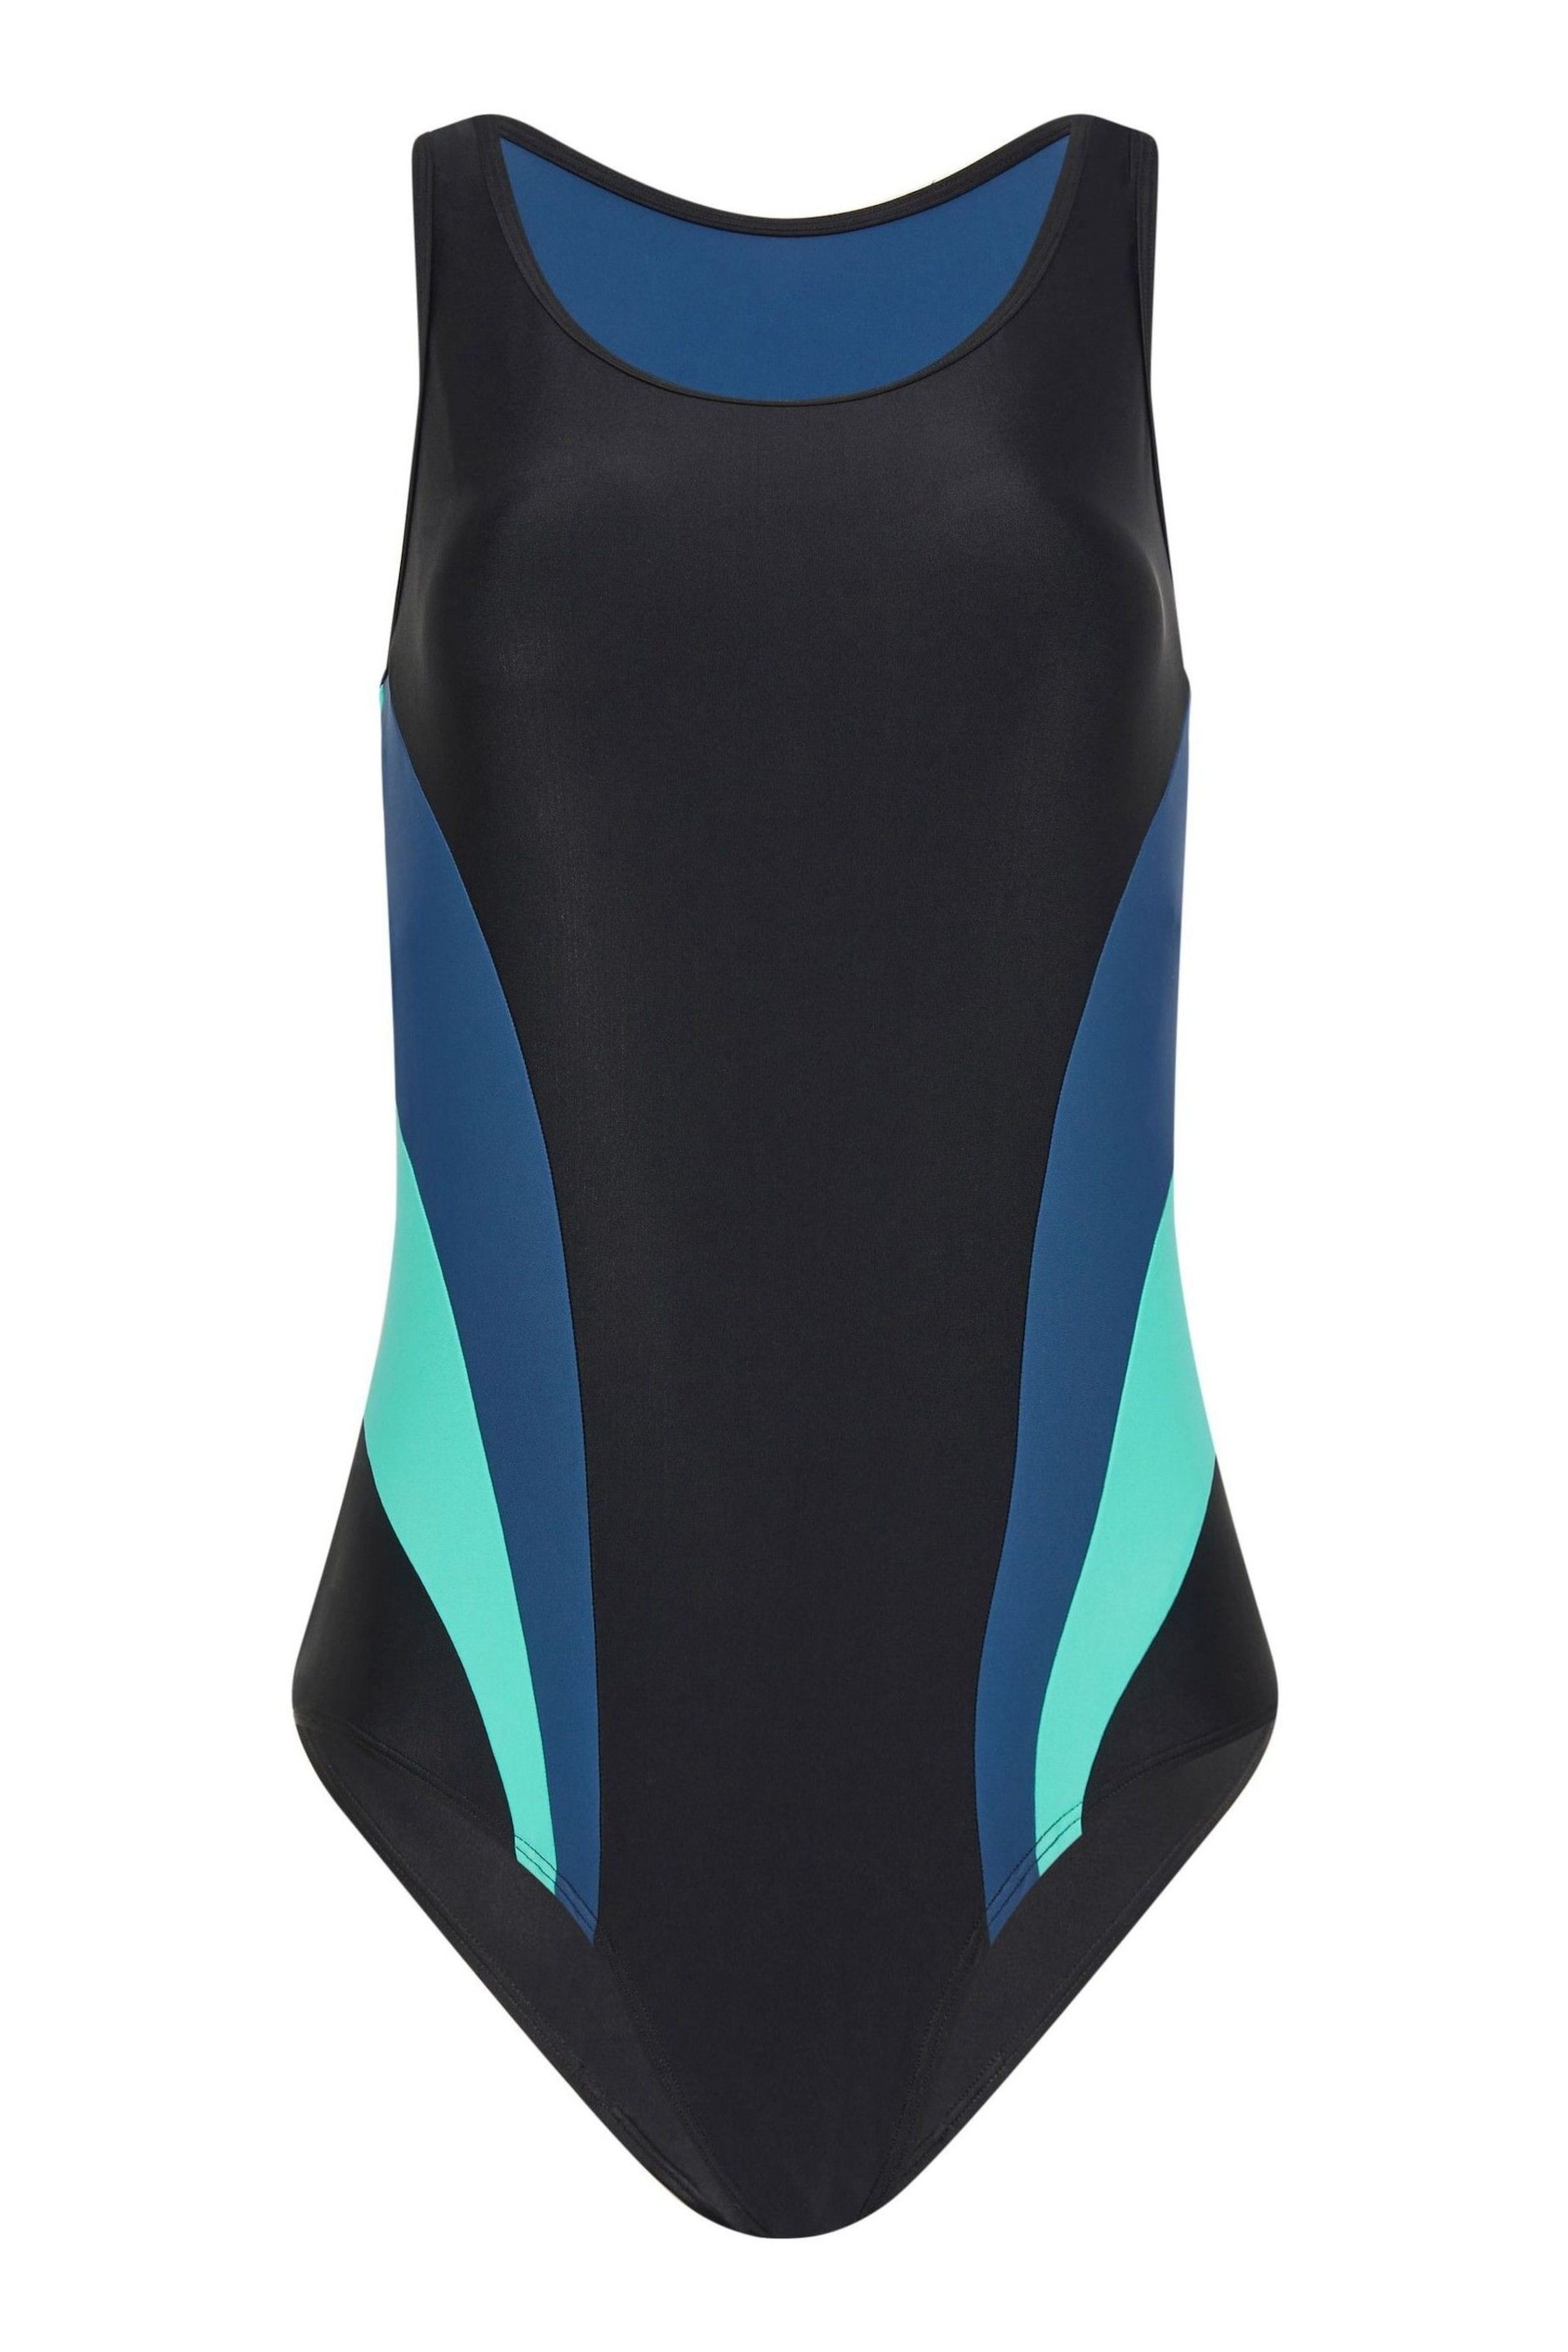 Long Tall Sally Black LTS Tall Black & Blue Active Contrast Swimsuit - Image 5 of 6